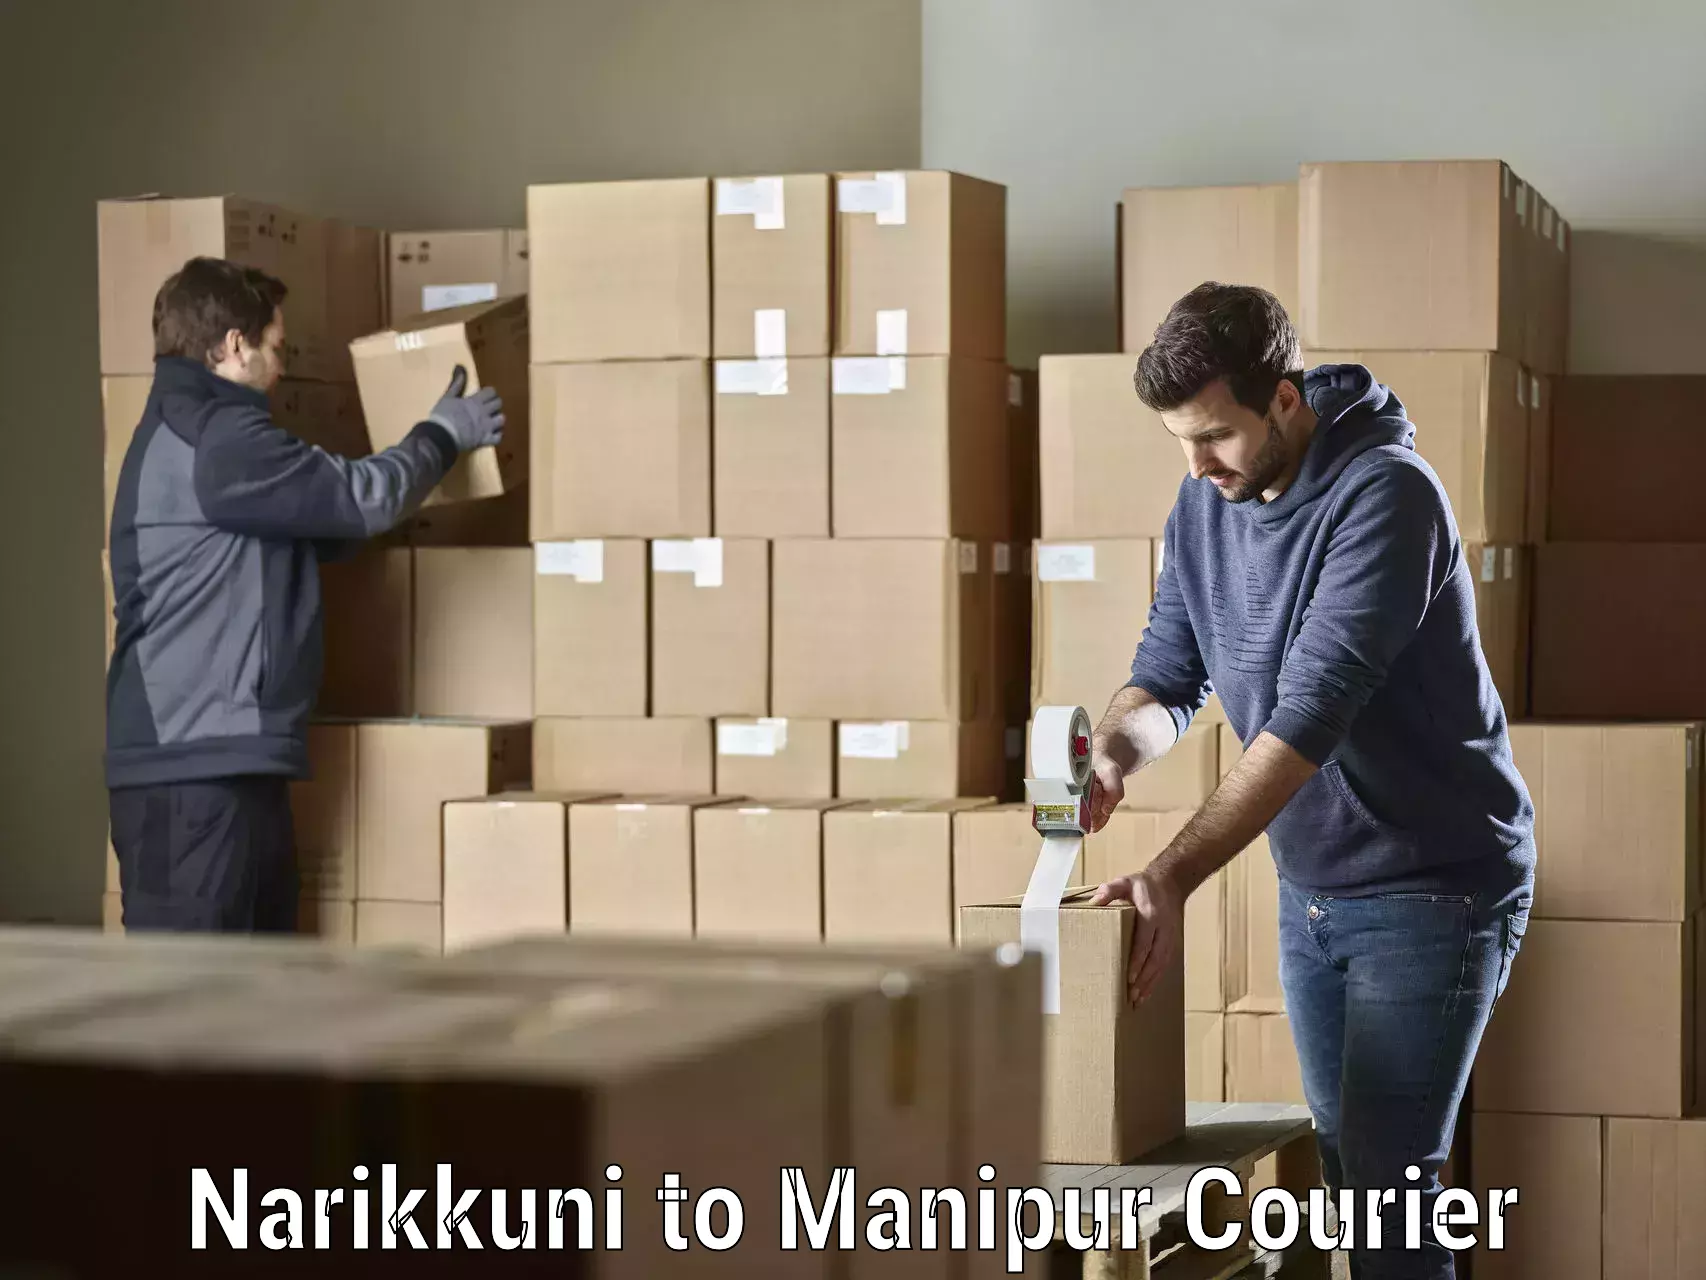 Business delivery service Narikkuni to Manipur